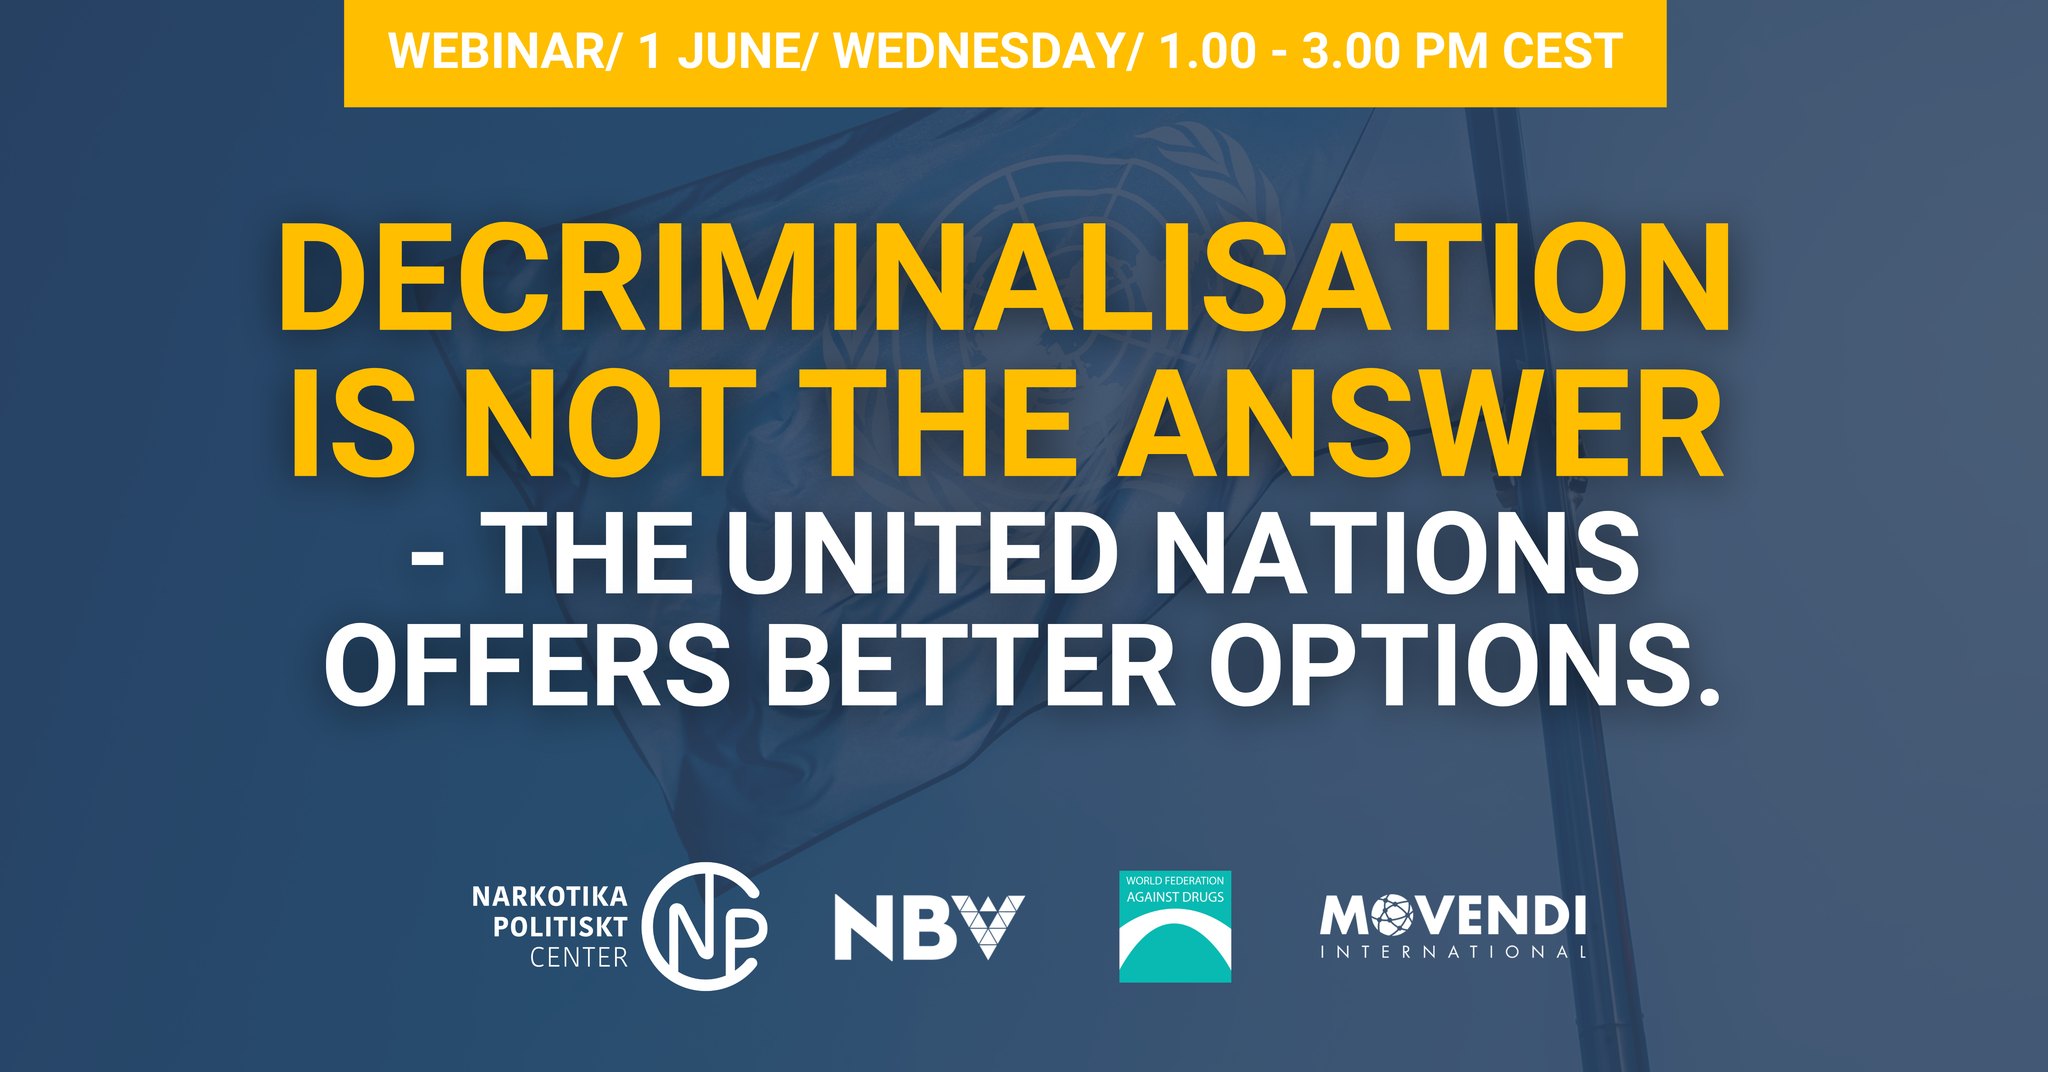 Webinar: Decriminalisation is not the answer - The United Nations offers better options.